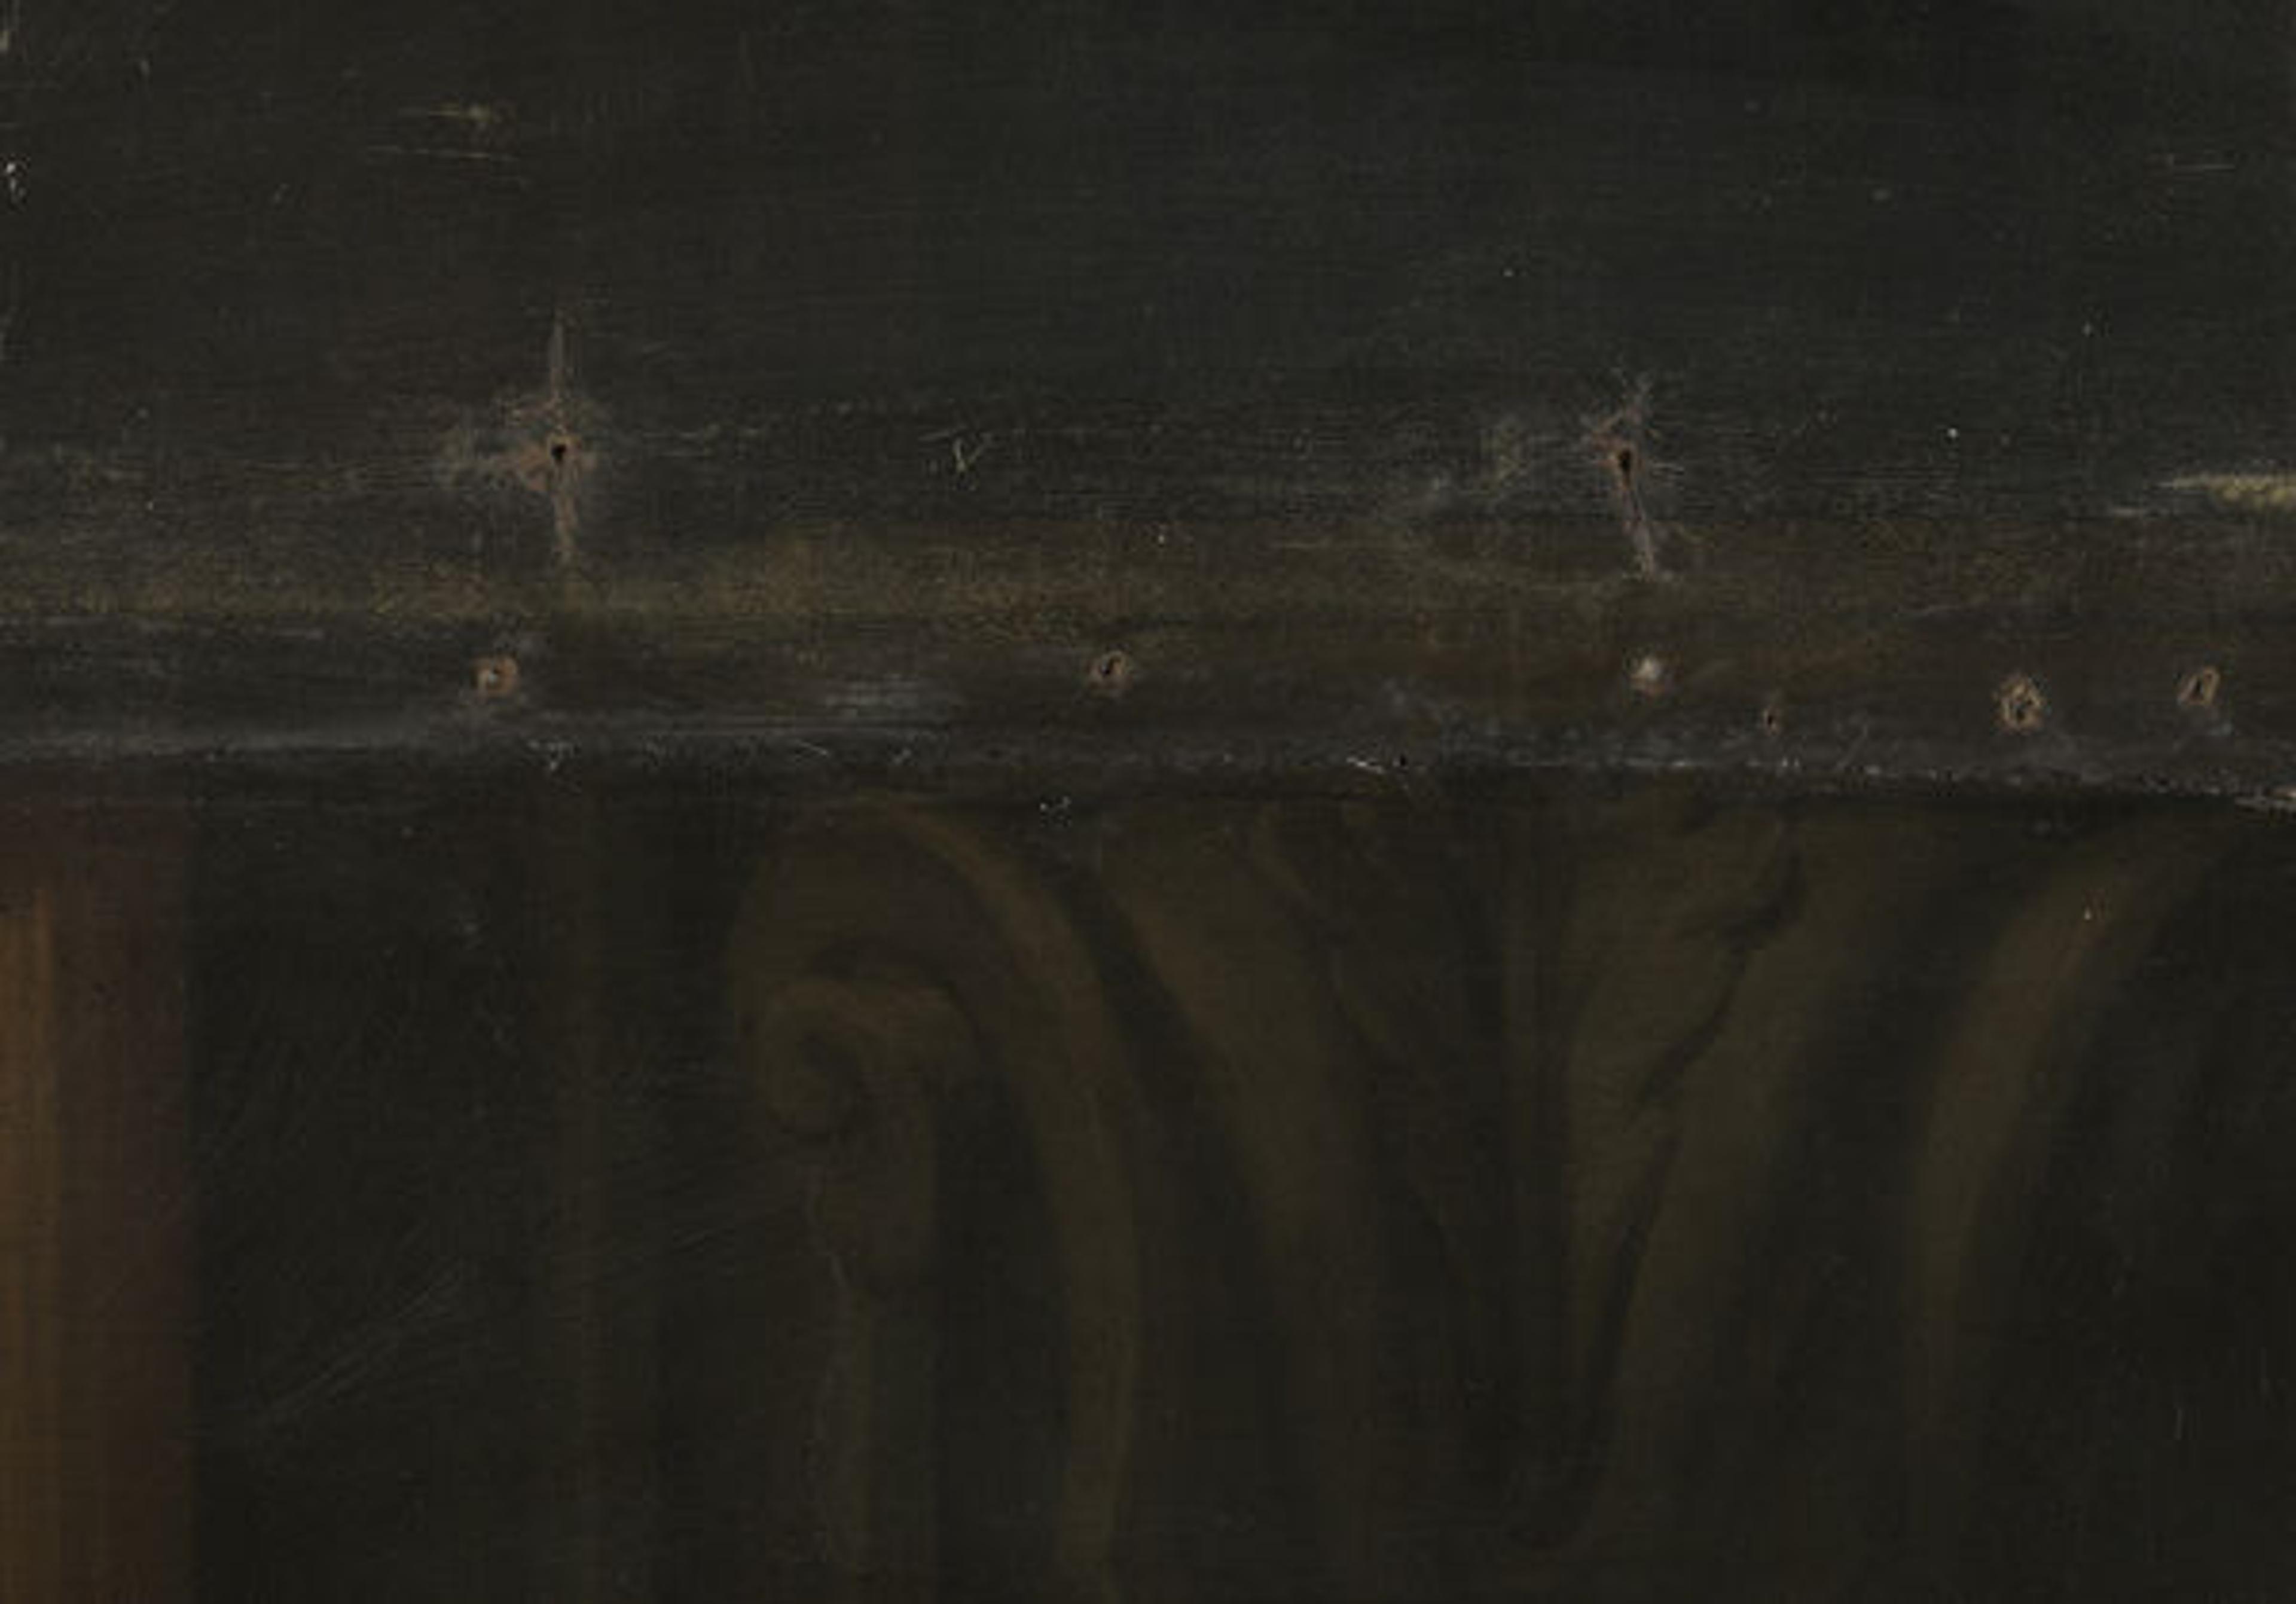 Charles Le Brun (French, 1619–1690) | Everhard Jabach (1618–1695) and His Family | 2014.250; Detail of upper right showing damage caused by tacks driven through original paint surface